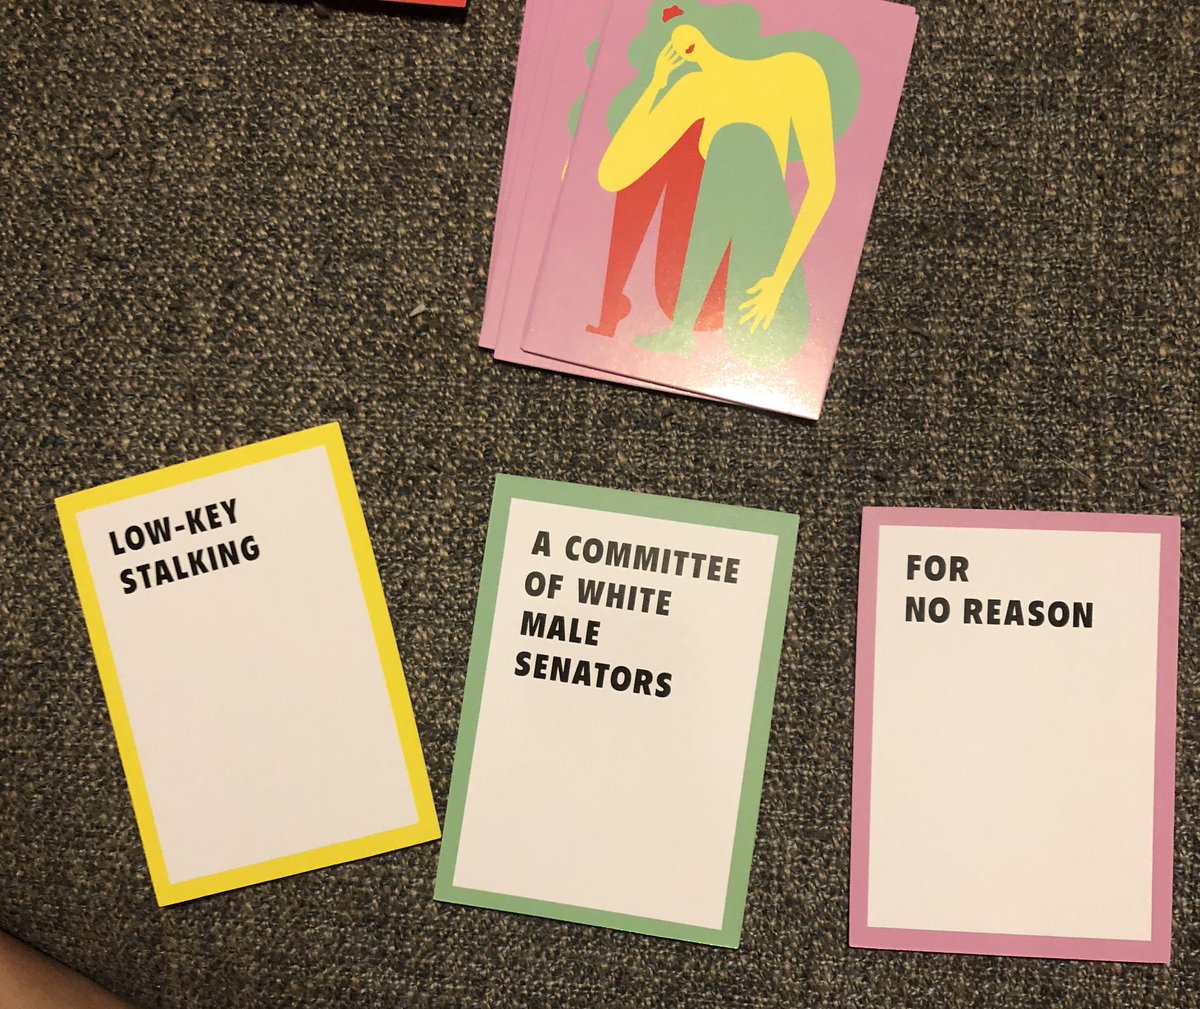 Our card game, Play the Patriarchy, is back in stock! Get yours at Shop Reductress: reductr.es/319N6om